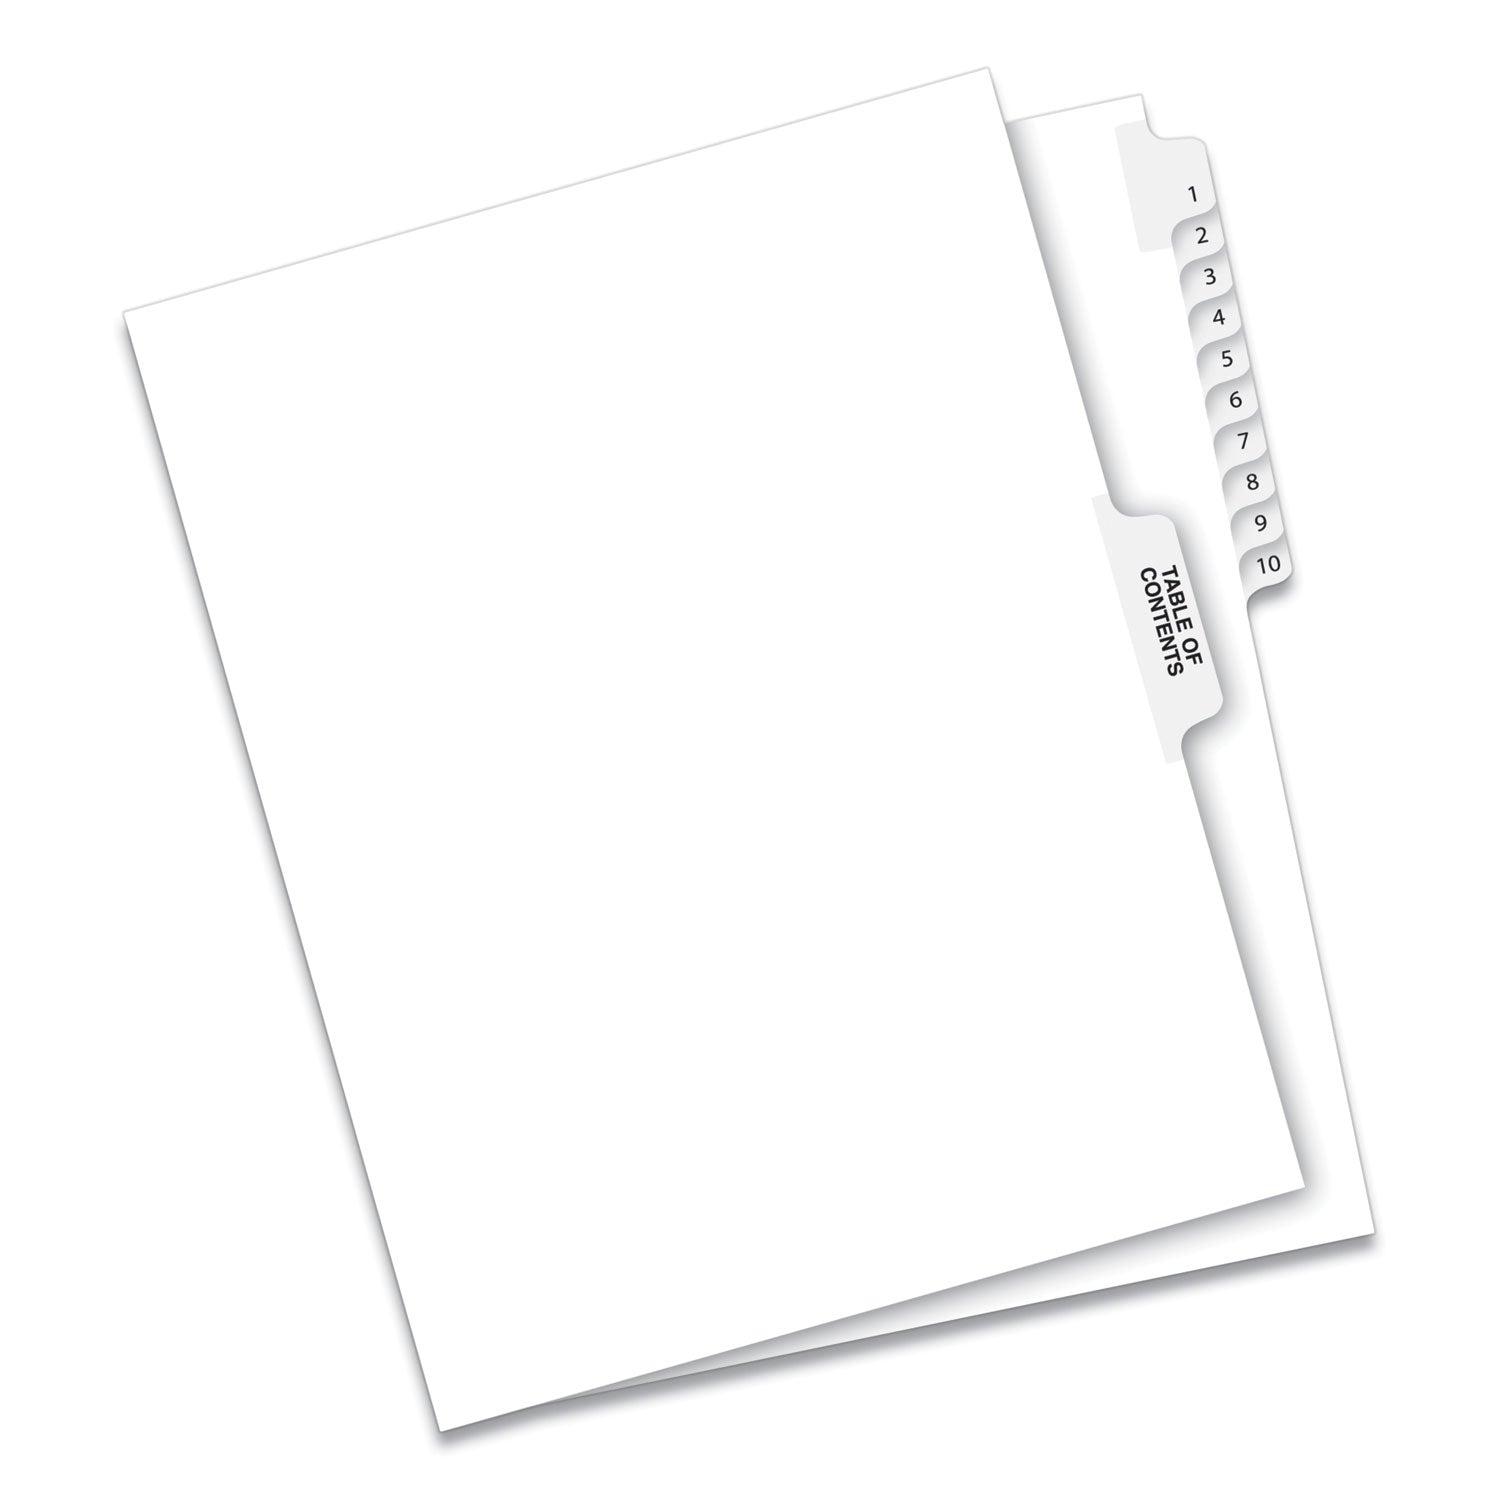 Preprinted Legal Exhibit Side Tab Index Dividers, Avery Style, 11-Tab, 1 to 10, 11 x 8.5, White, 1 Set - 